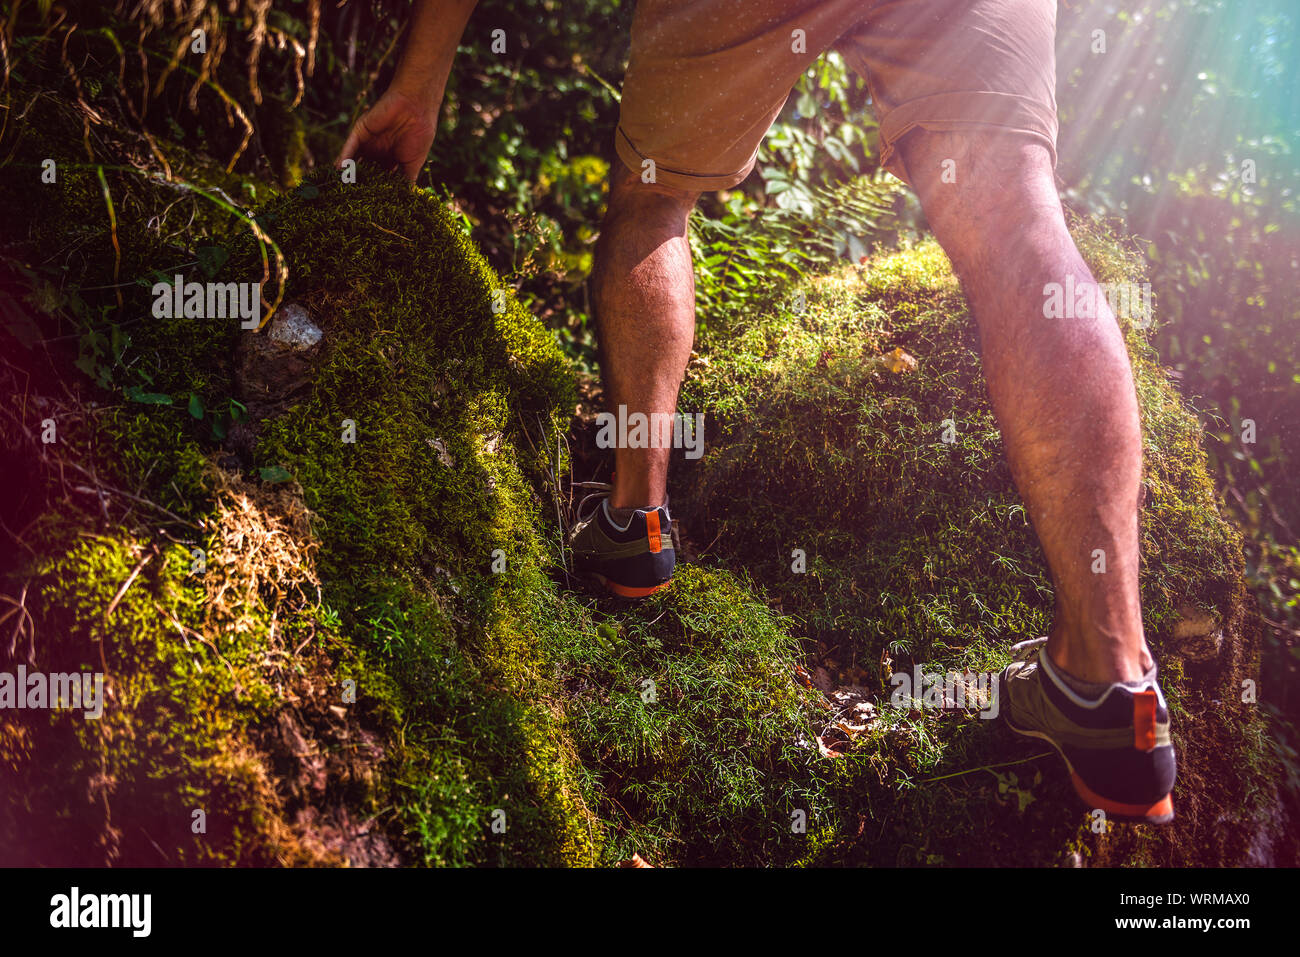 Hikers climbing on a moss-covered rock Stock Photo